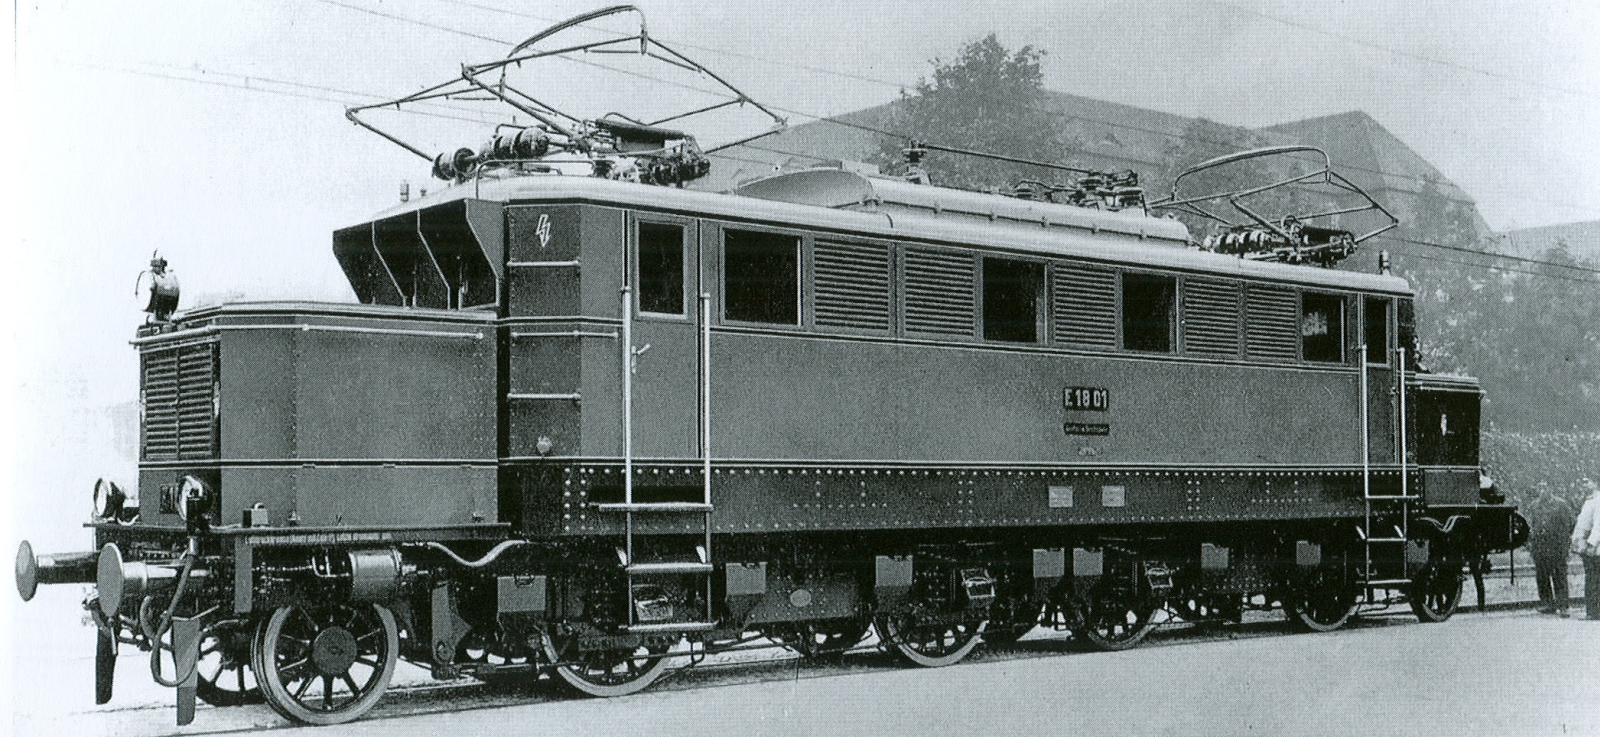 E 15 01 on an SSW works photo